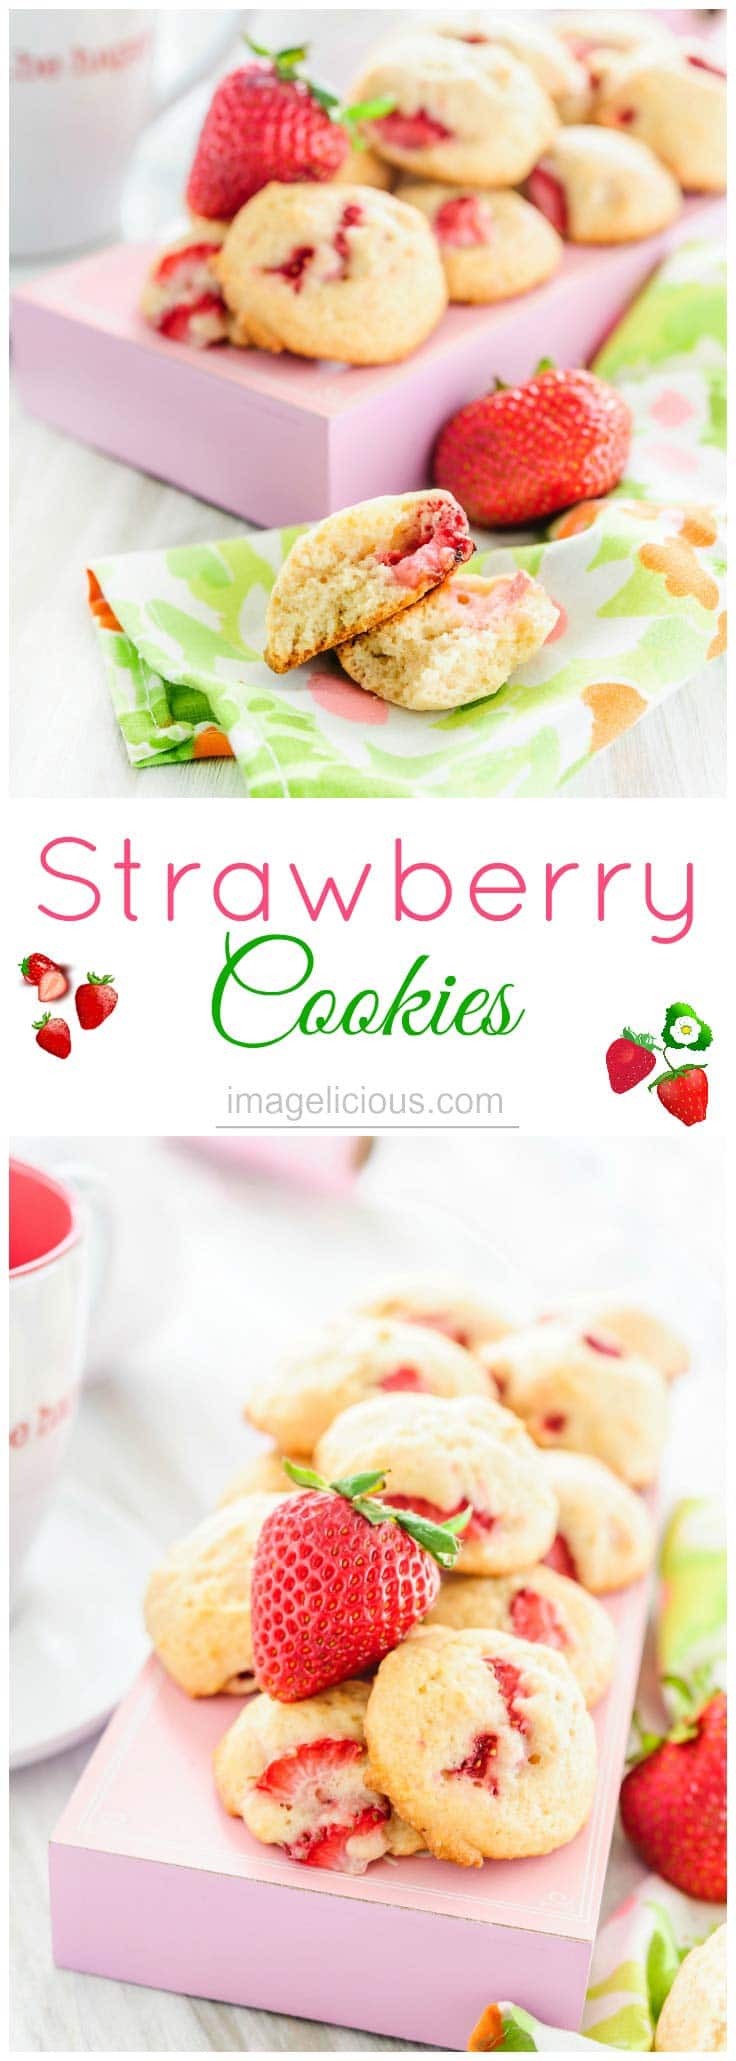 These Strawberry Cookies are very soft and have cake-like texture with little morsels of fruit, like little strawberry filled clouds or pillows. Absolutely perfect way to enjoy strawberries this summer | Imagelicious